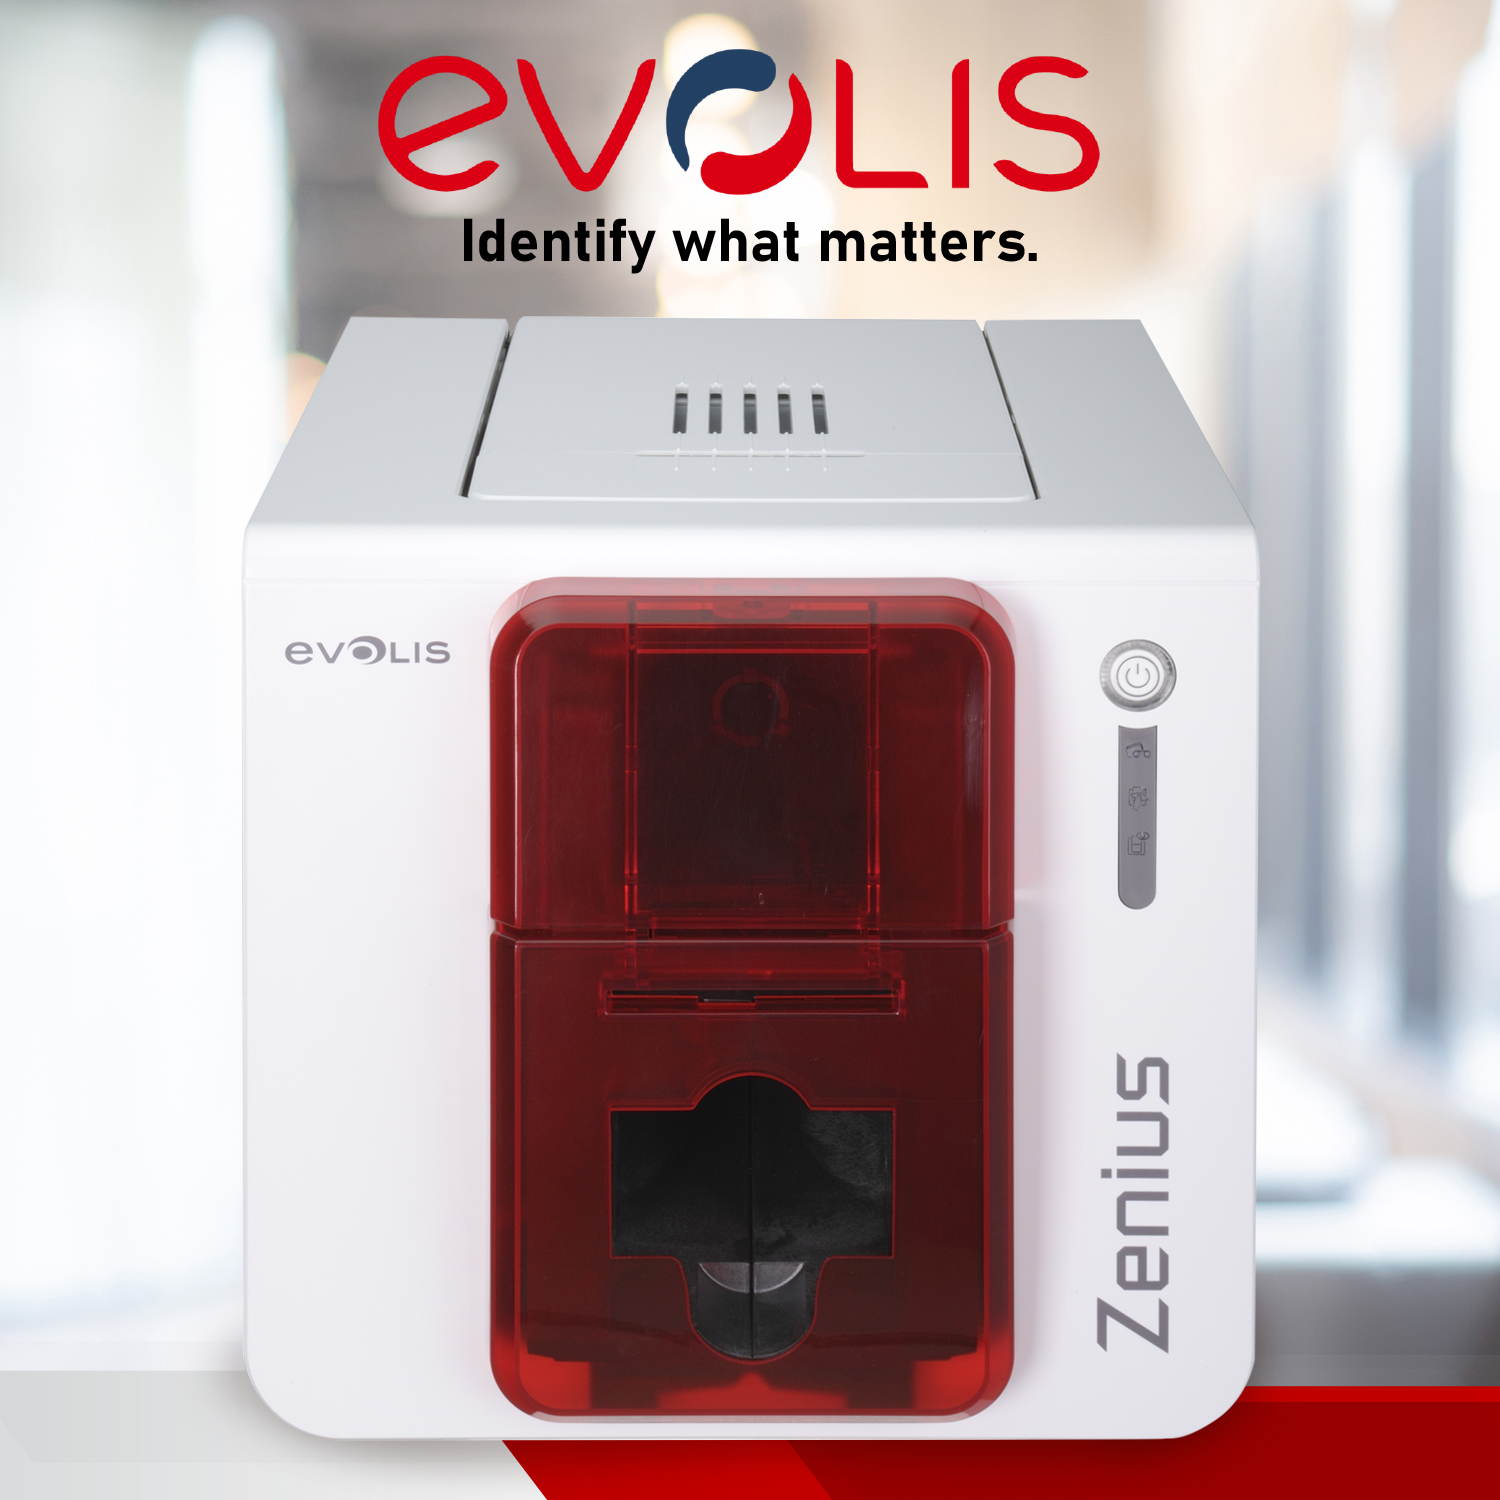 Prints Premium Quality Pictures Fast & Easy ID Maker Zenius Professional ID Card Printer Easiest to Use Software 1-Sided Badge Printer Machine 